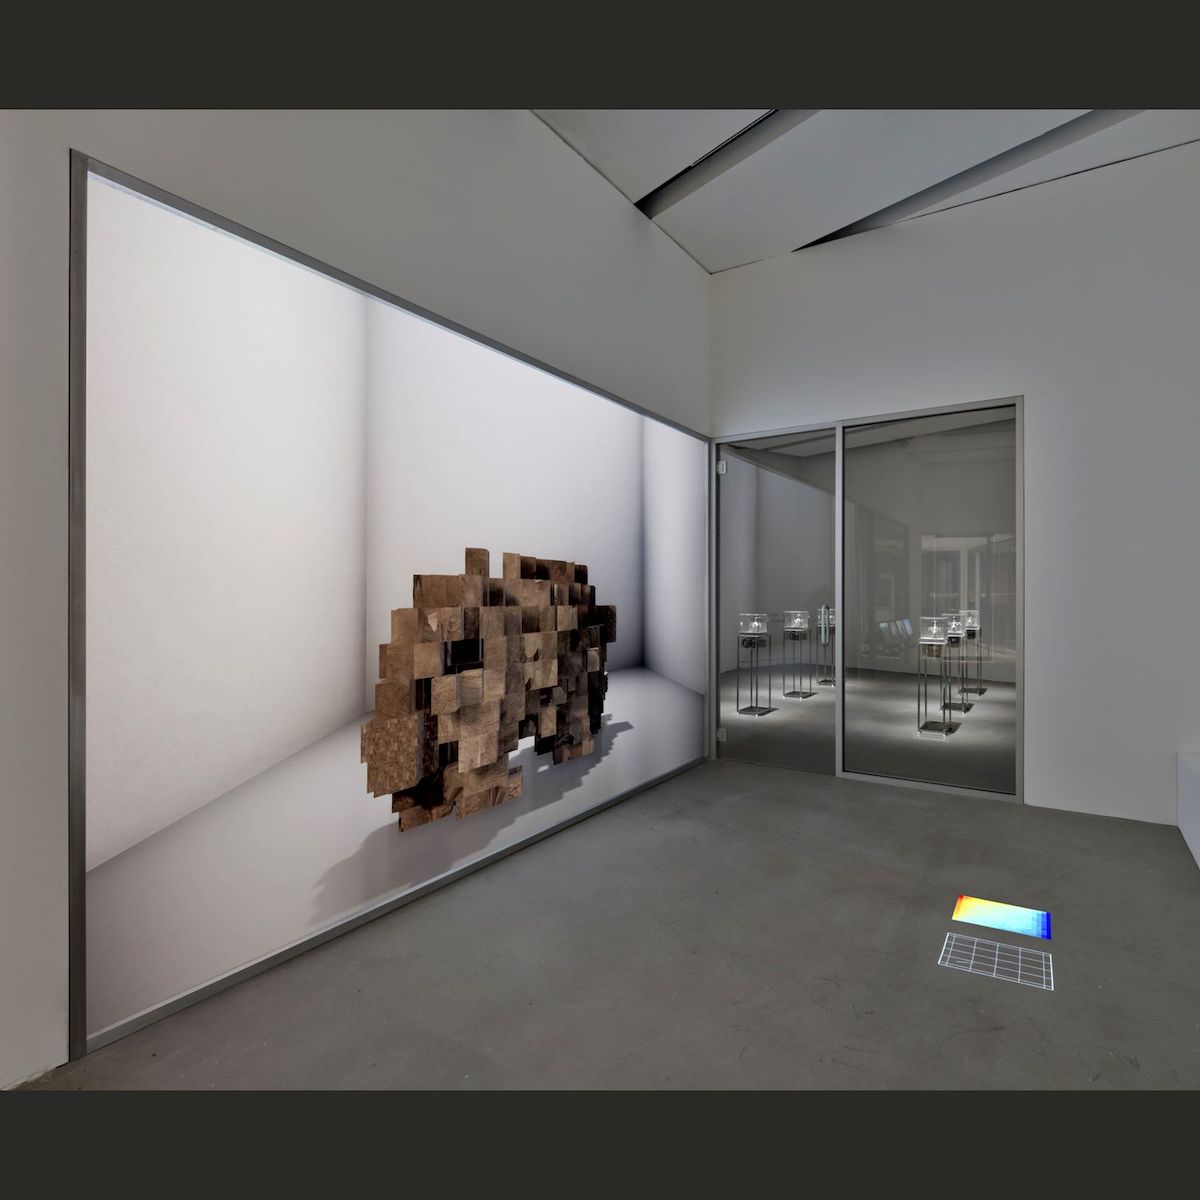 A digital projection of a series of brown pixelated blocks in an indoor gallery space with white walls and grey flooring.